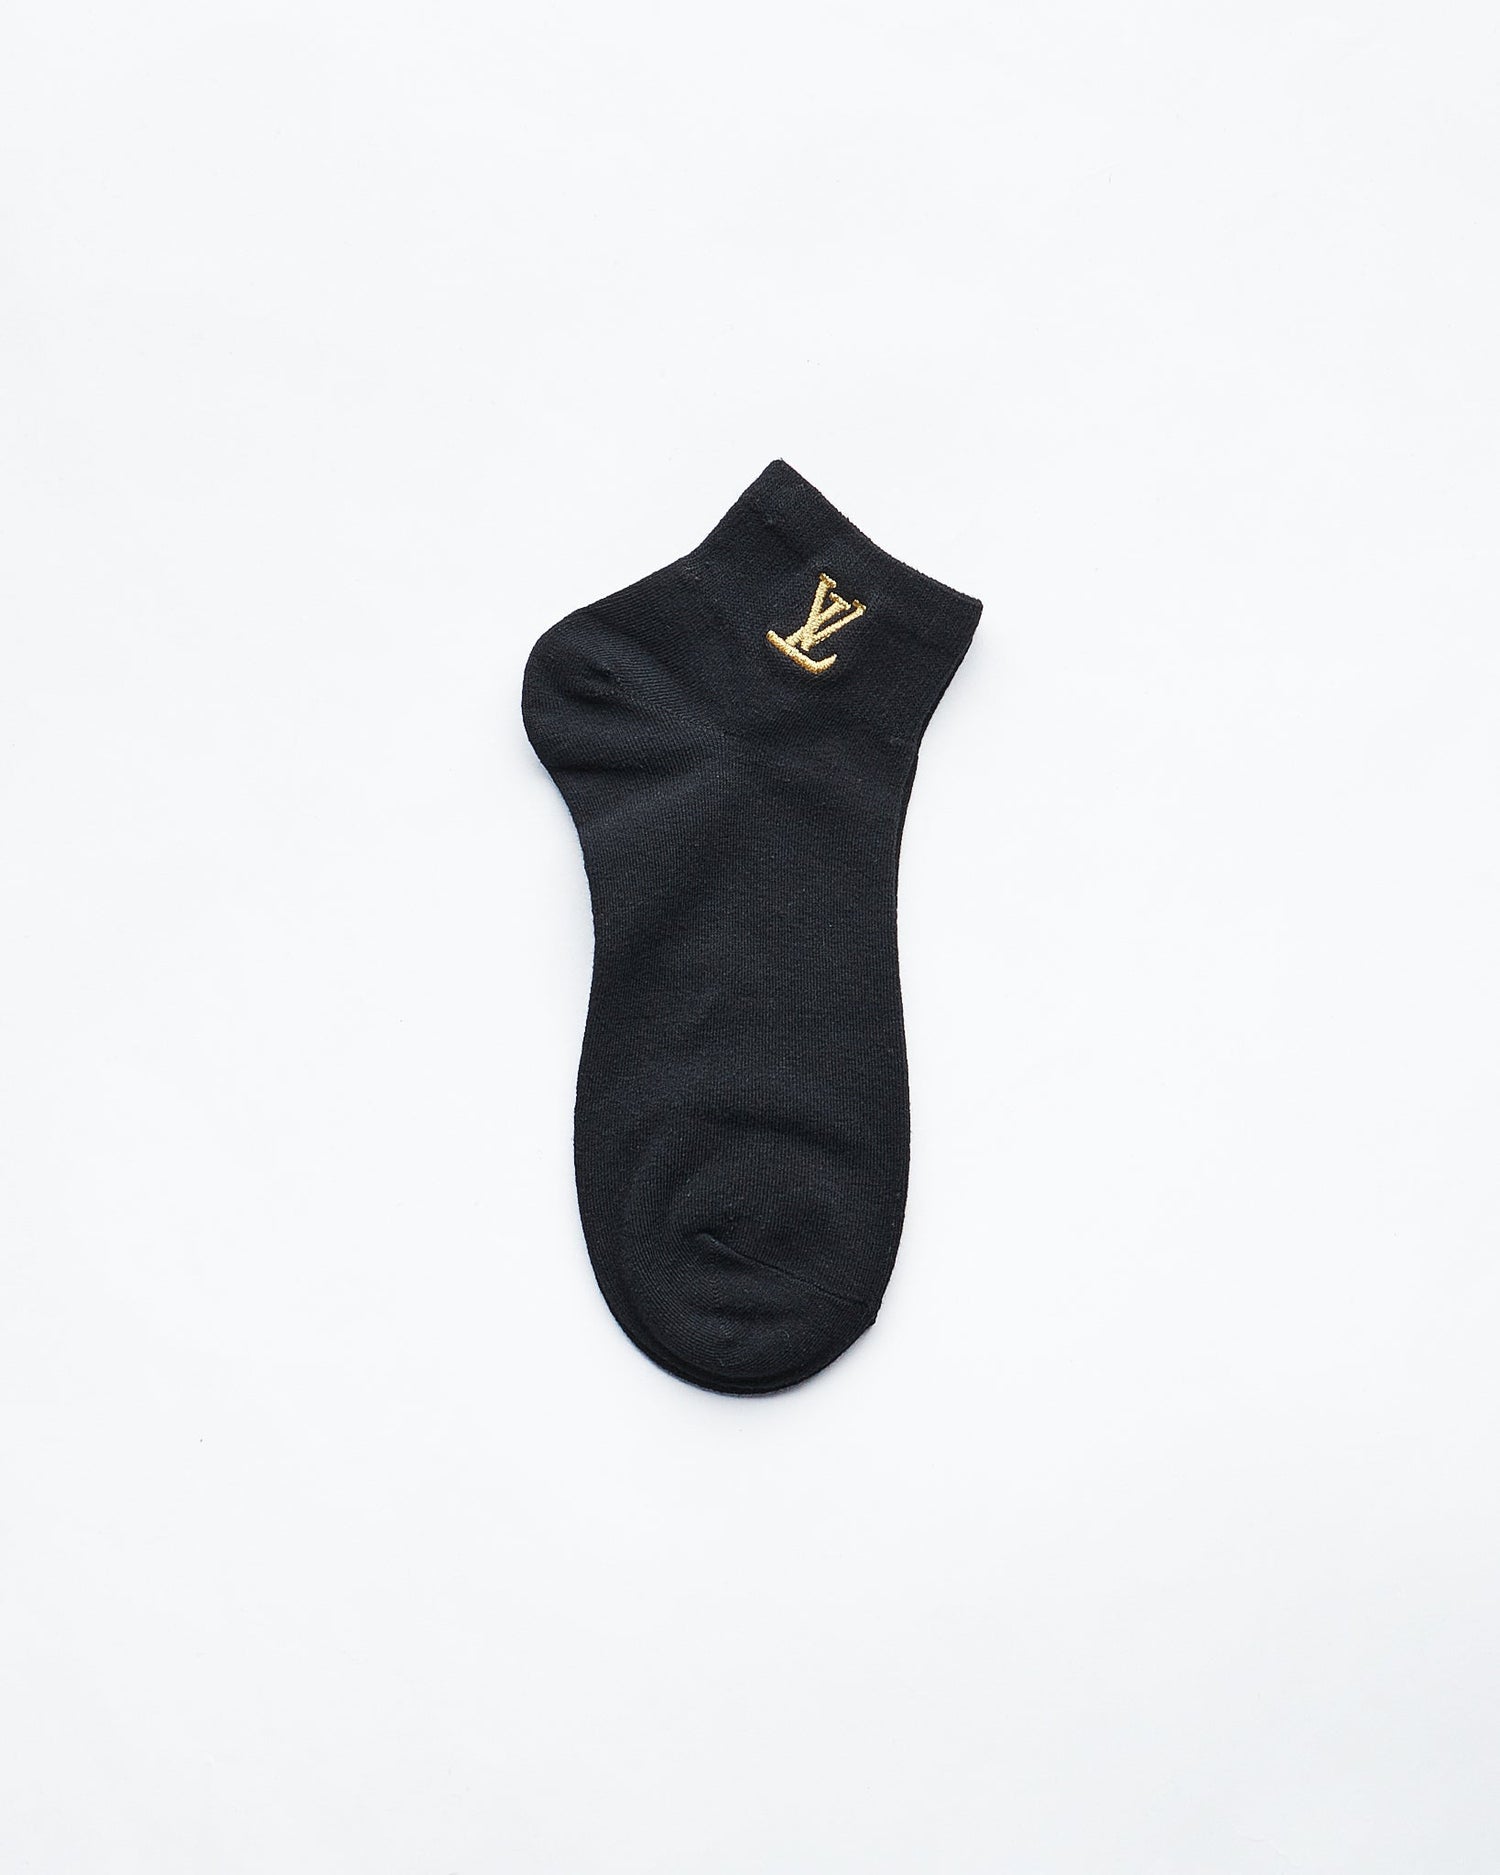 MOI OUTFIT-Gold Logo Embroidered 5 Pairs Quarter Socks 15.90